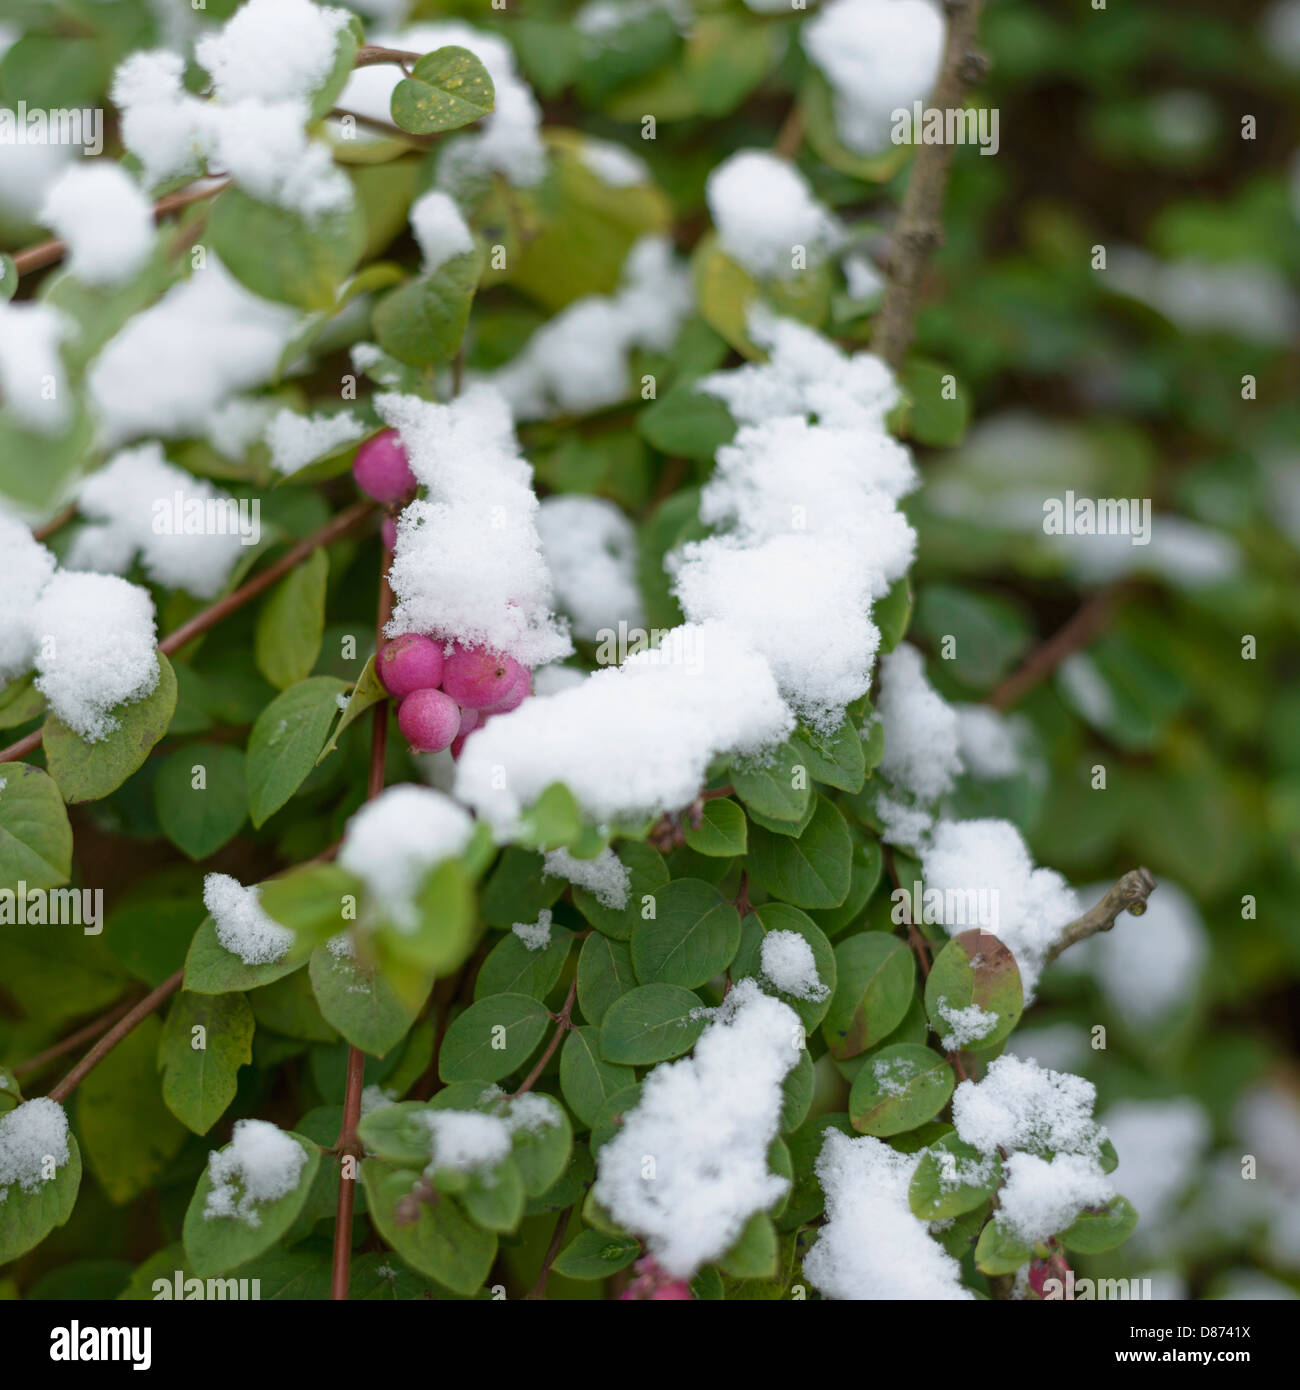 Germany, Shrub with pink berries covered with snow Stock Photo